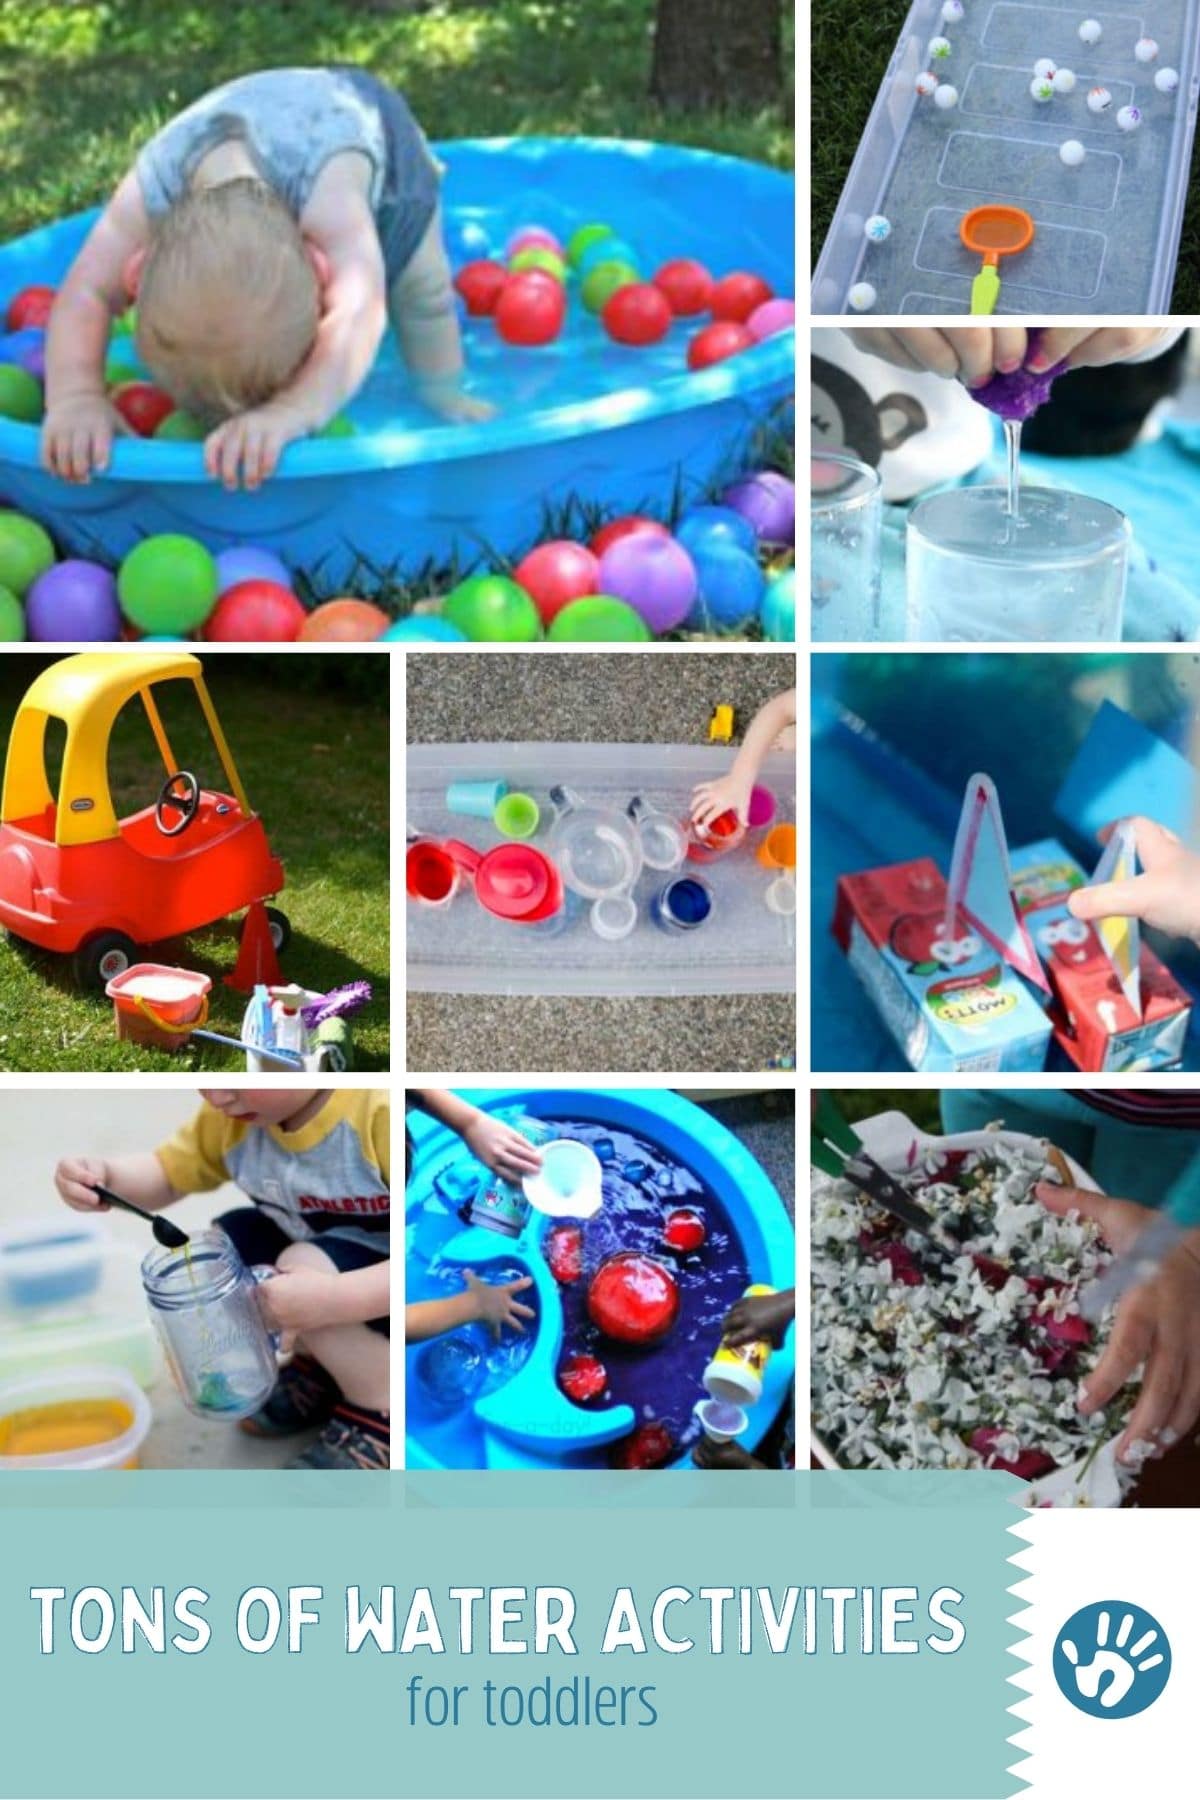 Water Activities for Toddlers that are Tons of Fun & Simple, Too